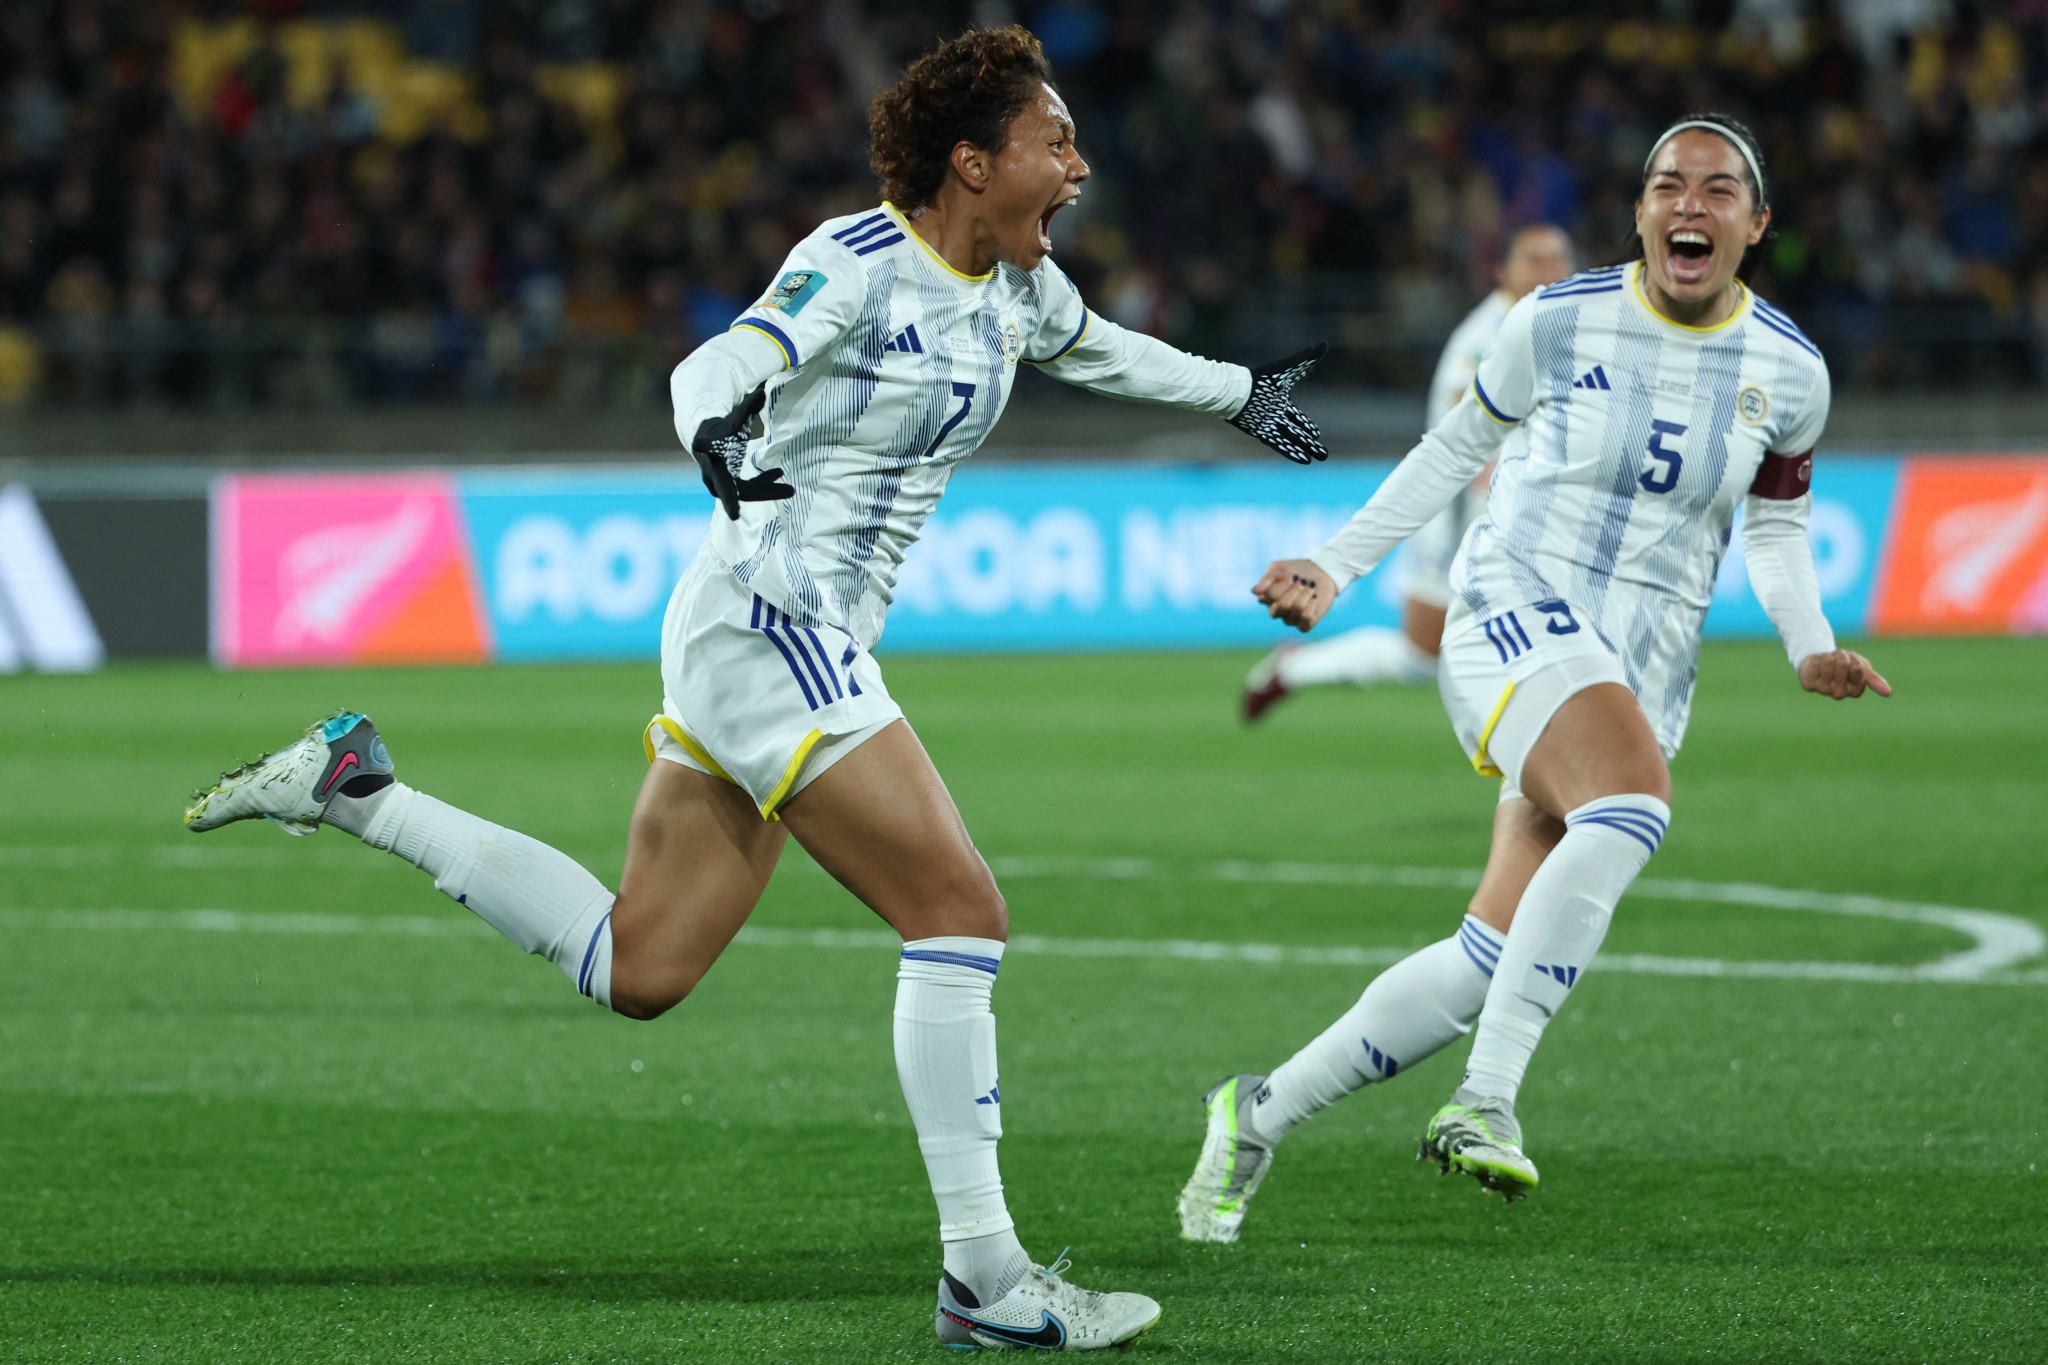 Sarina Bolden, left, scored the only goal as the Philippines beat New Zealand ©Getty Images